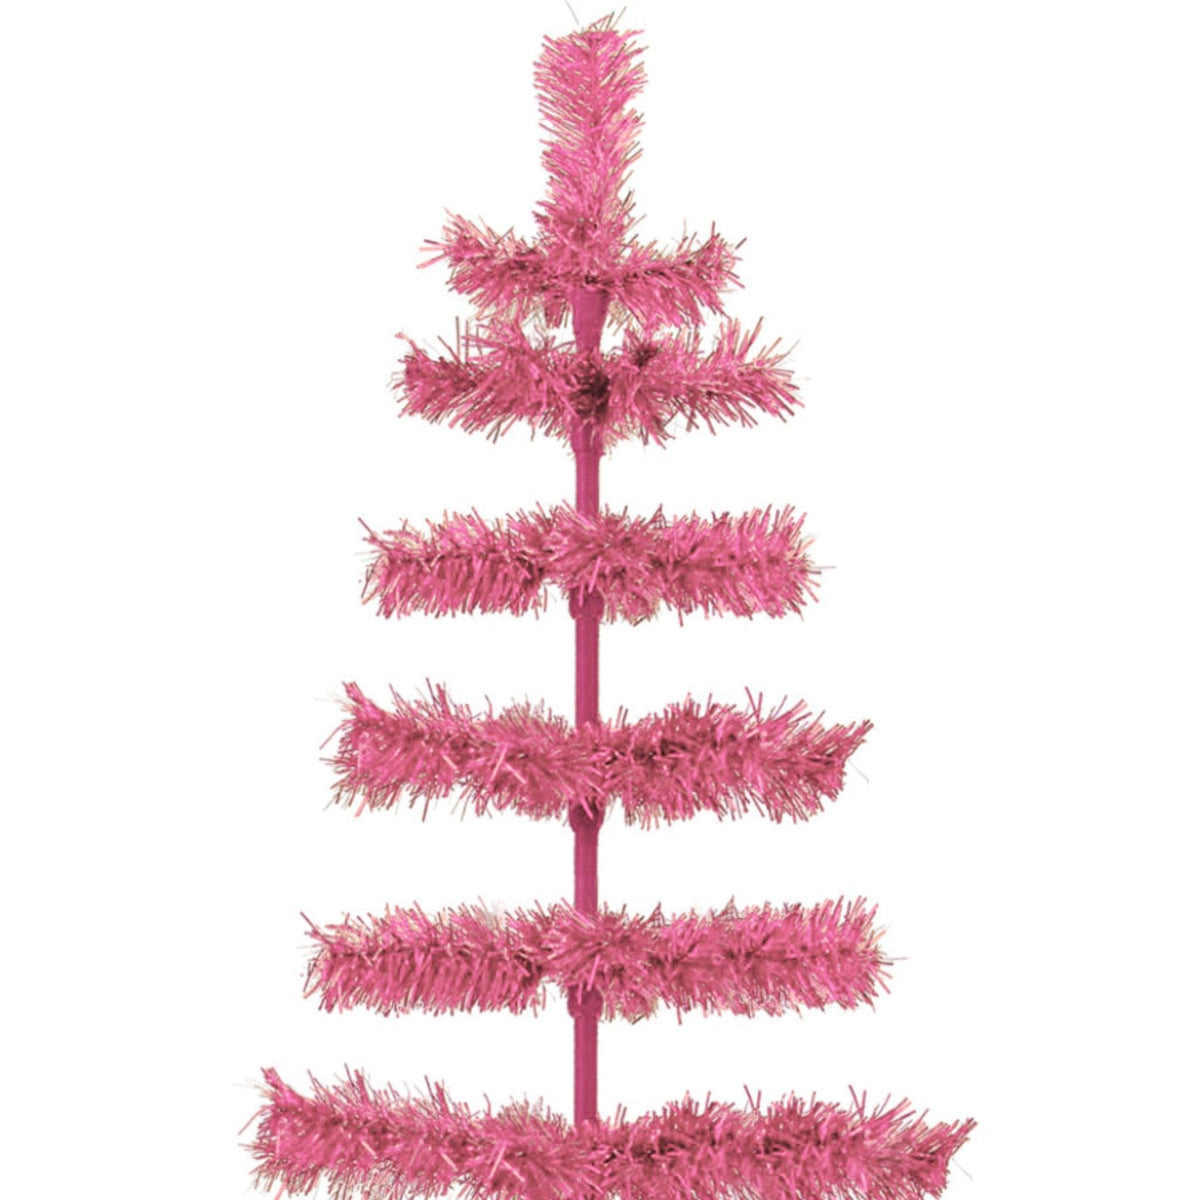 Top of the 60in tall Pink Christmas Tree with tinsel branches